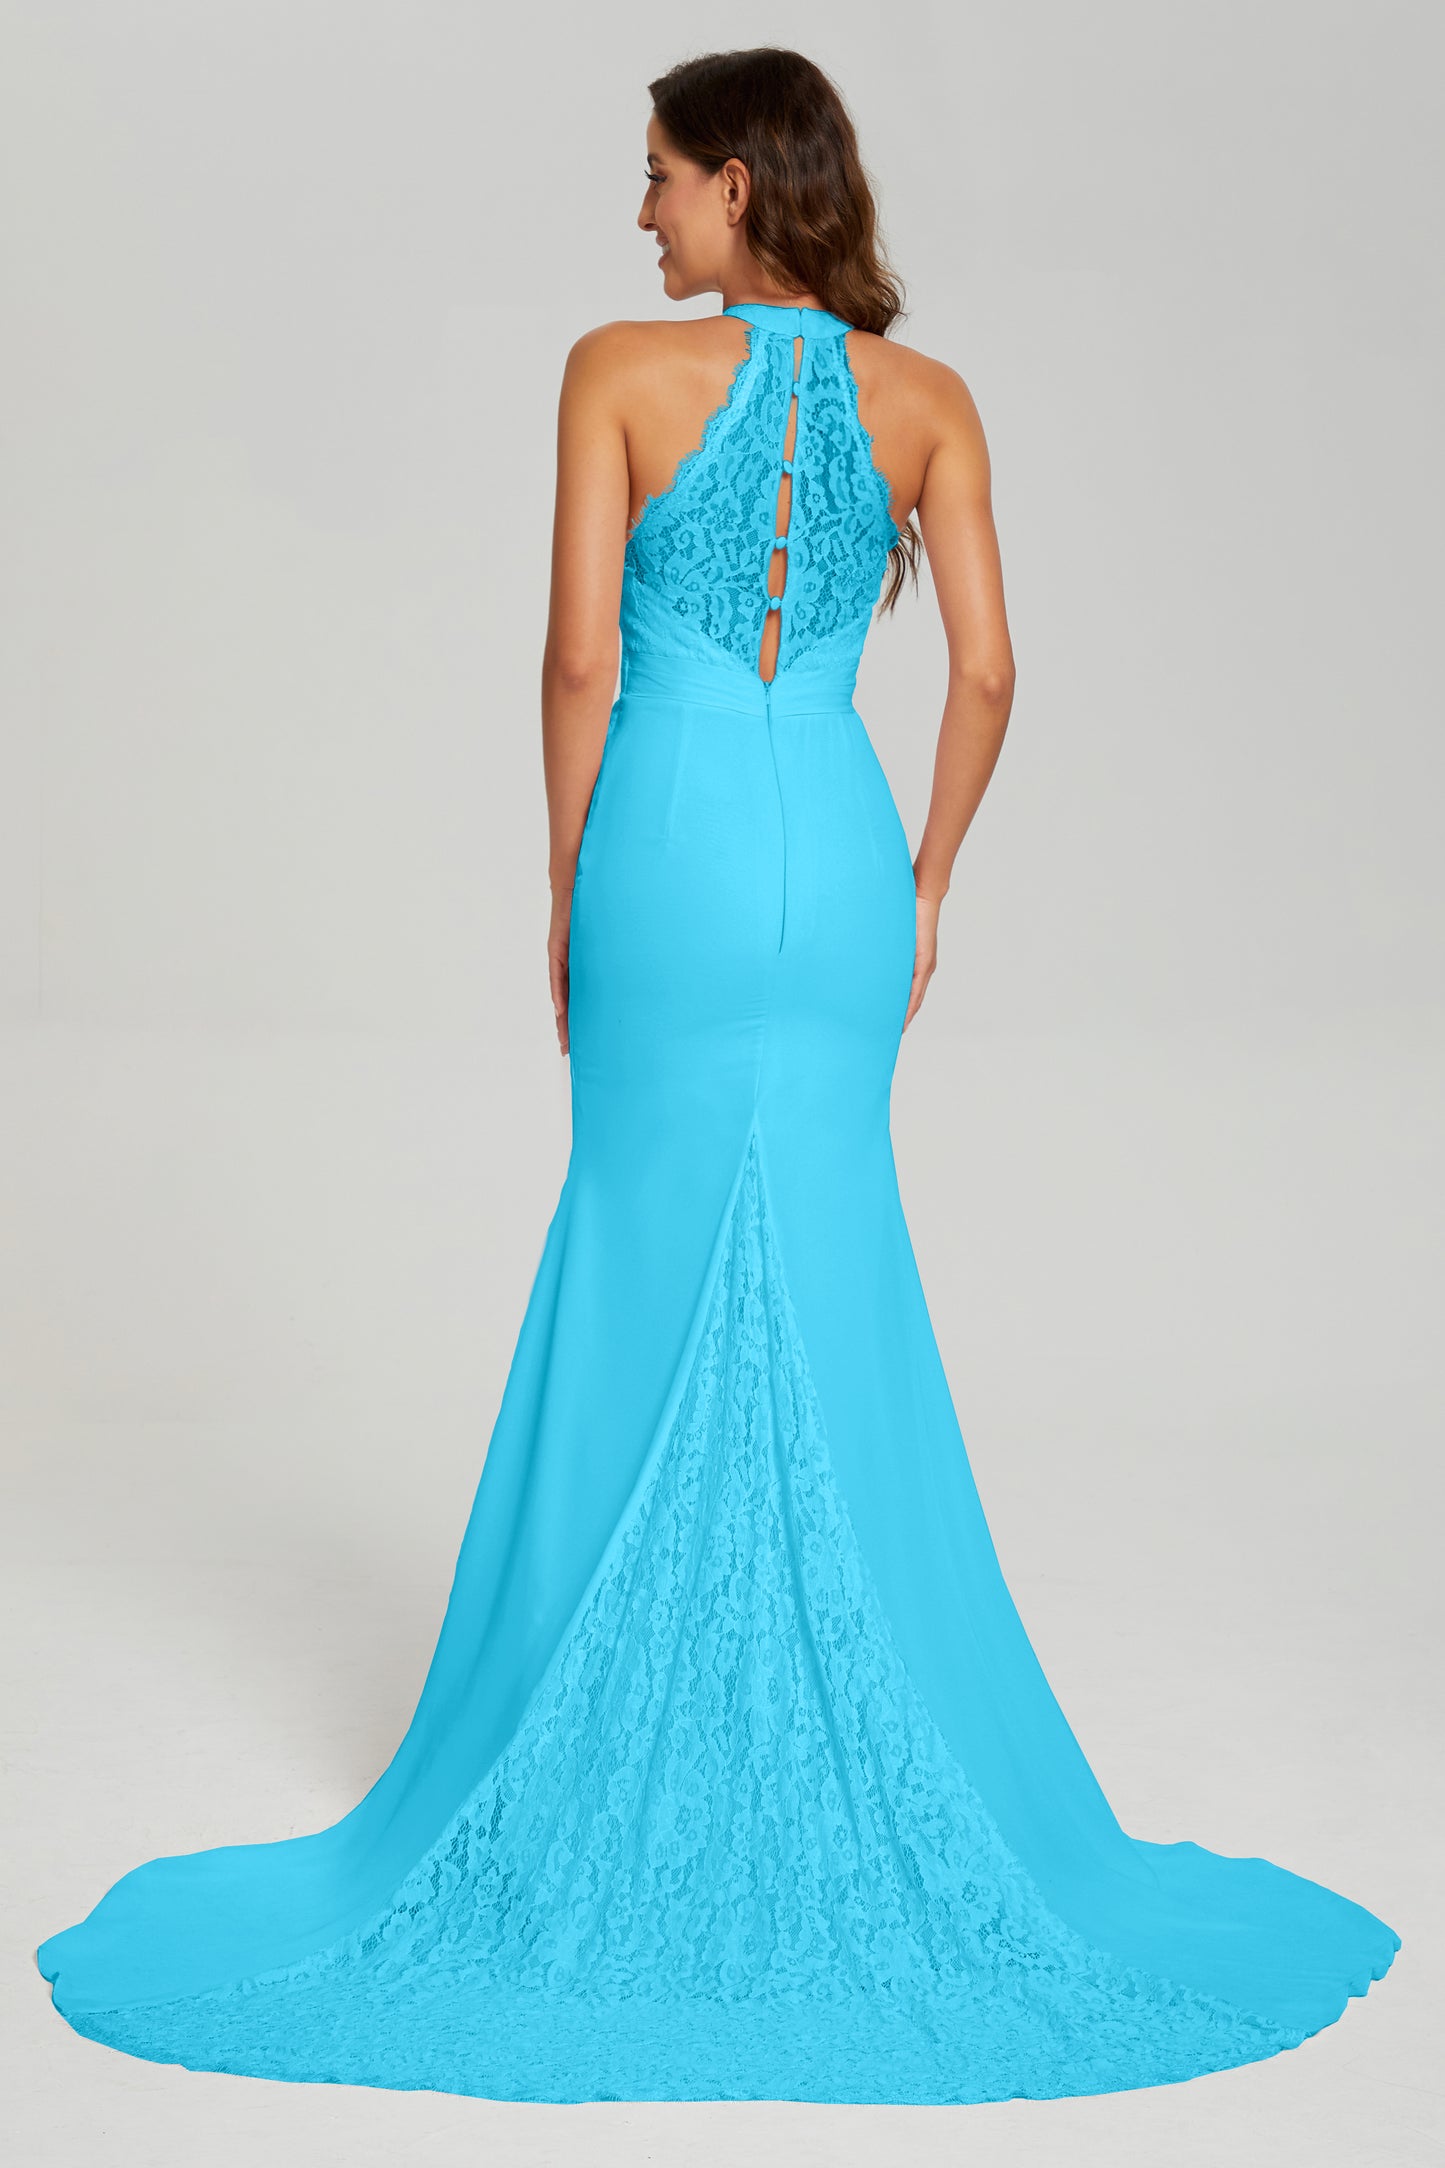 Mermaid Halter Lace Prom Dresses With Trailing